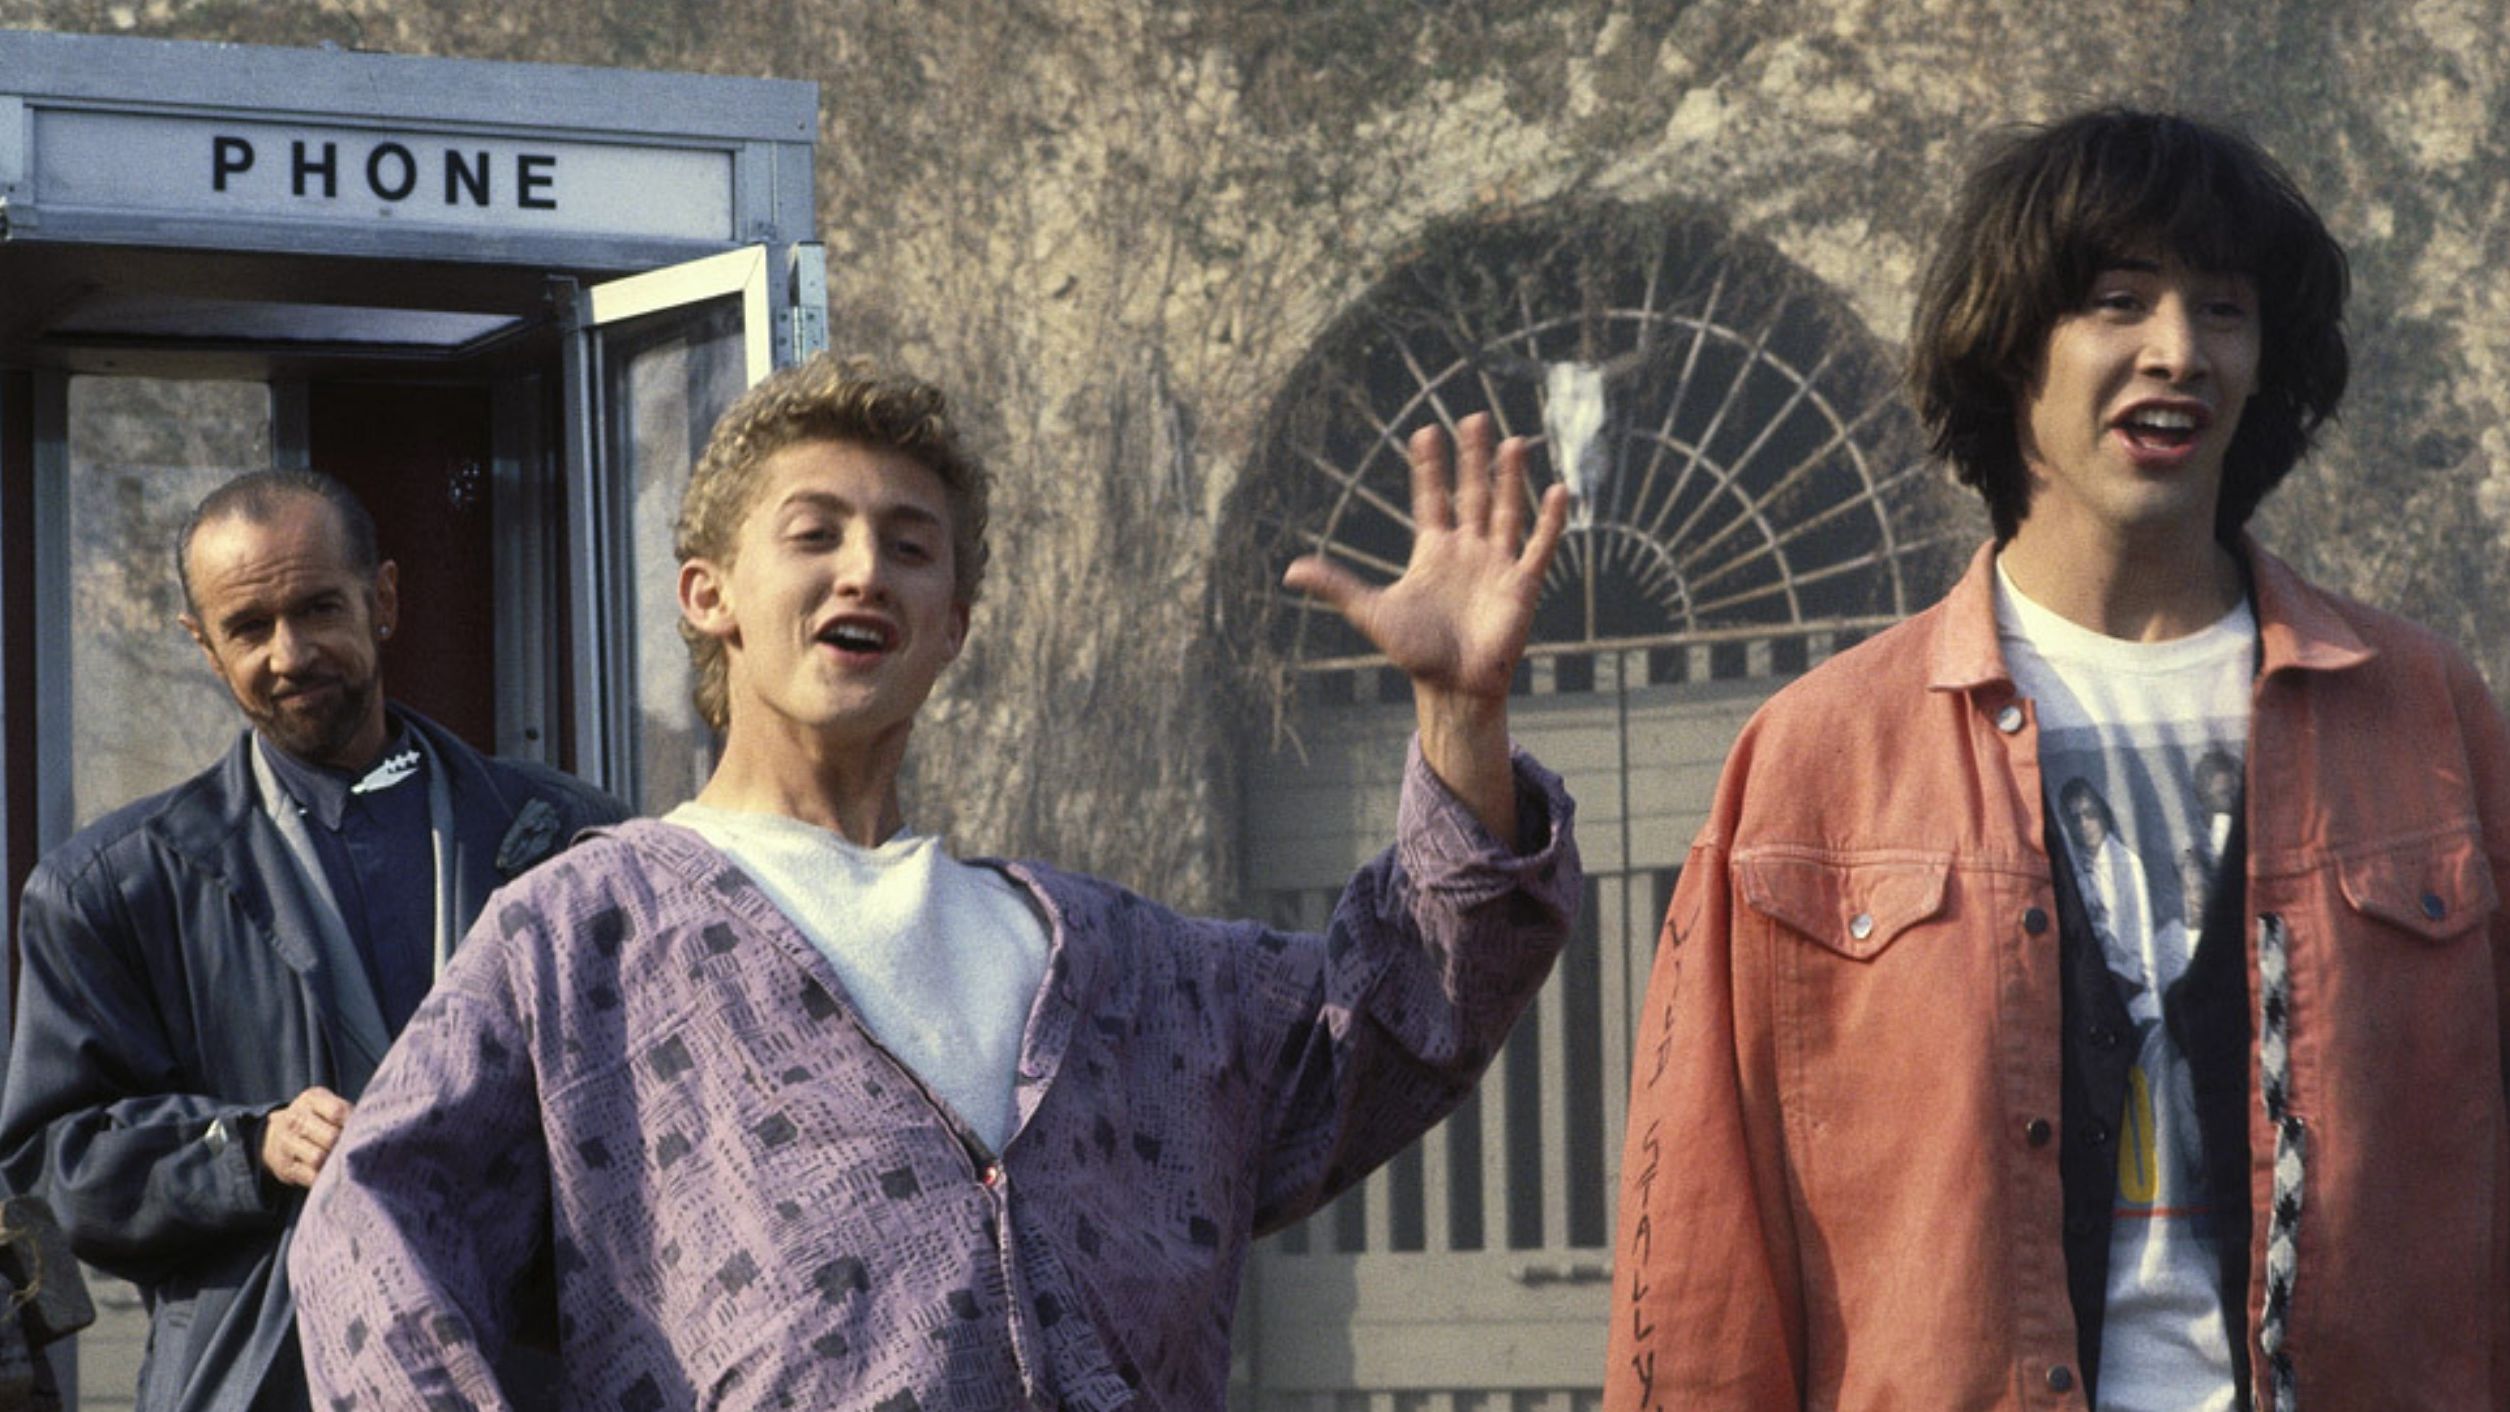 bill and ted rufus